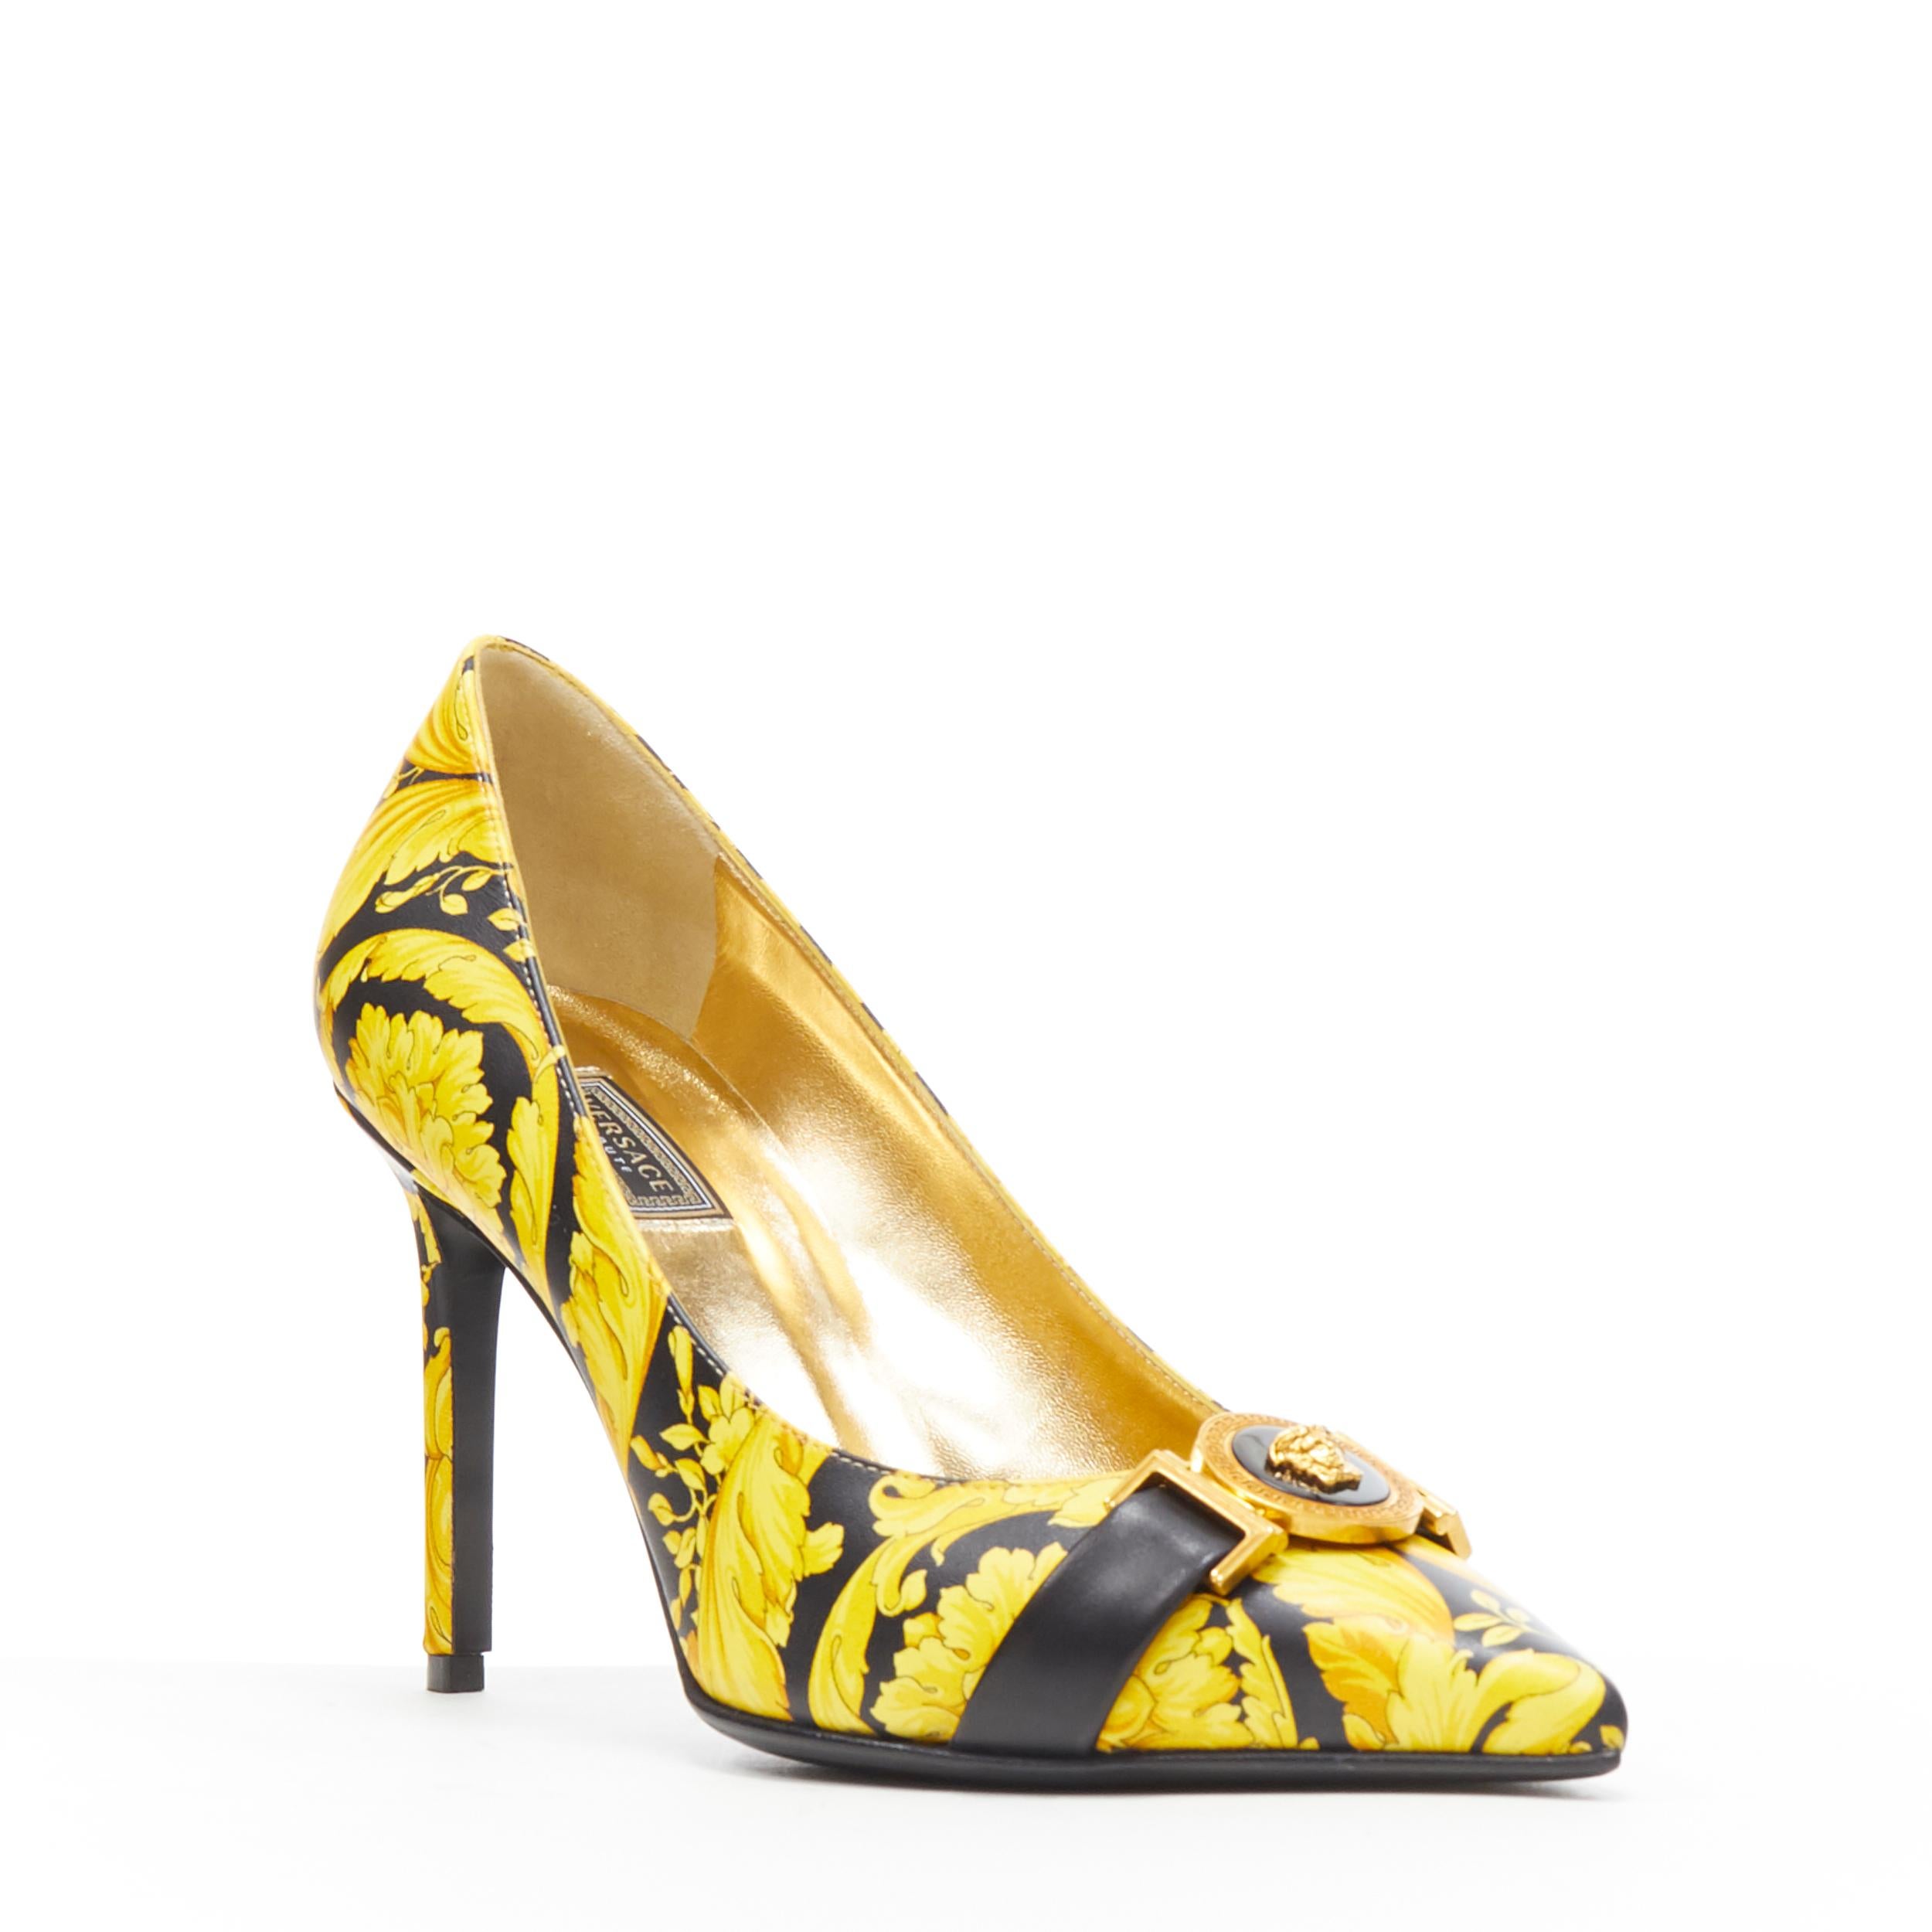 new VERSACE 1992 Tribute Baroque Hibiscus barocco Medusa strap leather pump EU38
Brand: Versace
Designer: Donatella Versace
Collection: Spring Summer 2018
Model Name / Style: Baroque pump
Material: Leather
Color: Gold, black
Pattern: Floral
Extra